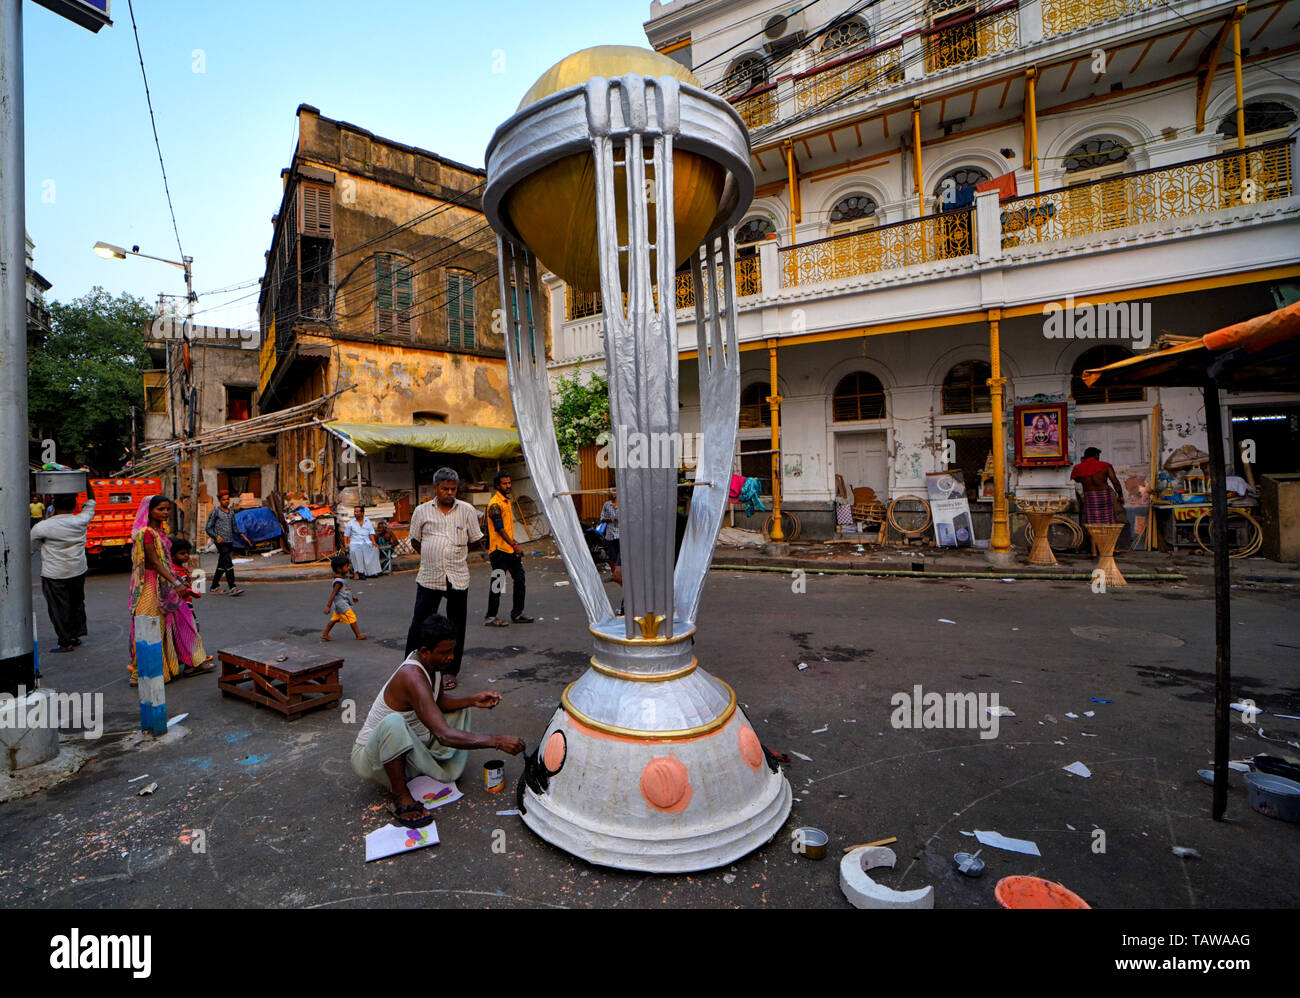 Kolkata, West Bengal, India. 28th May, 2019. An artist seen making final touches on a Giant Replica of the World Cup Cricket 2019 Trophy, which will be placed at a shopping mall during the Tournament.World Cup Cricket is scheduled to start from 30th May 2019, hosted by England & Wales. Credit: Avishek Das/SOPA Images/ZUMA Wire/Alamy Live News Stock Photo